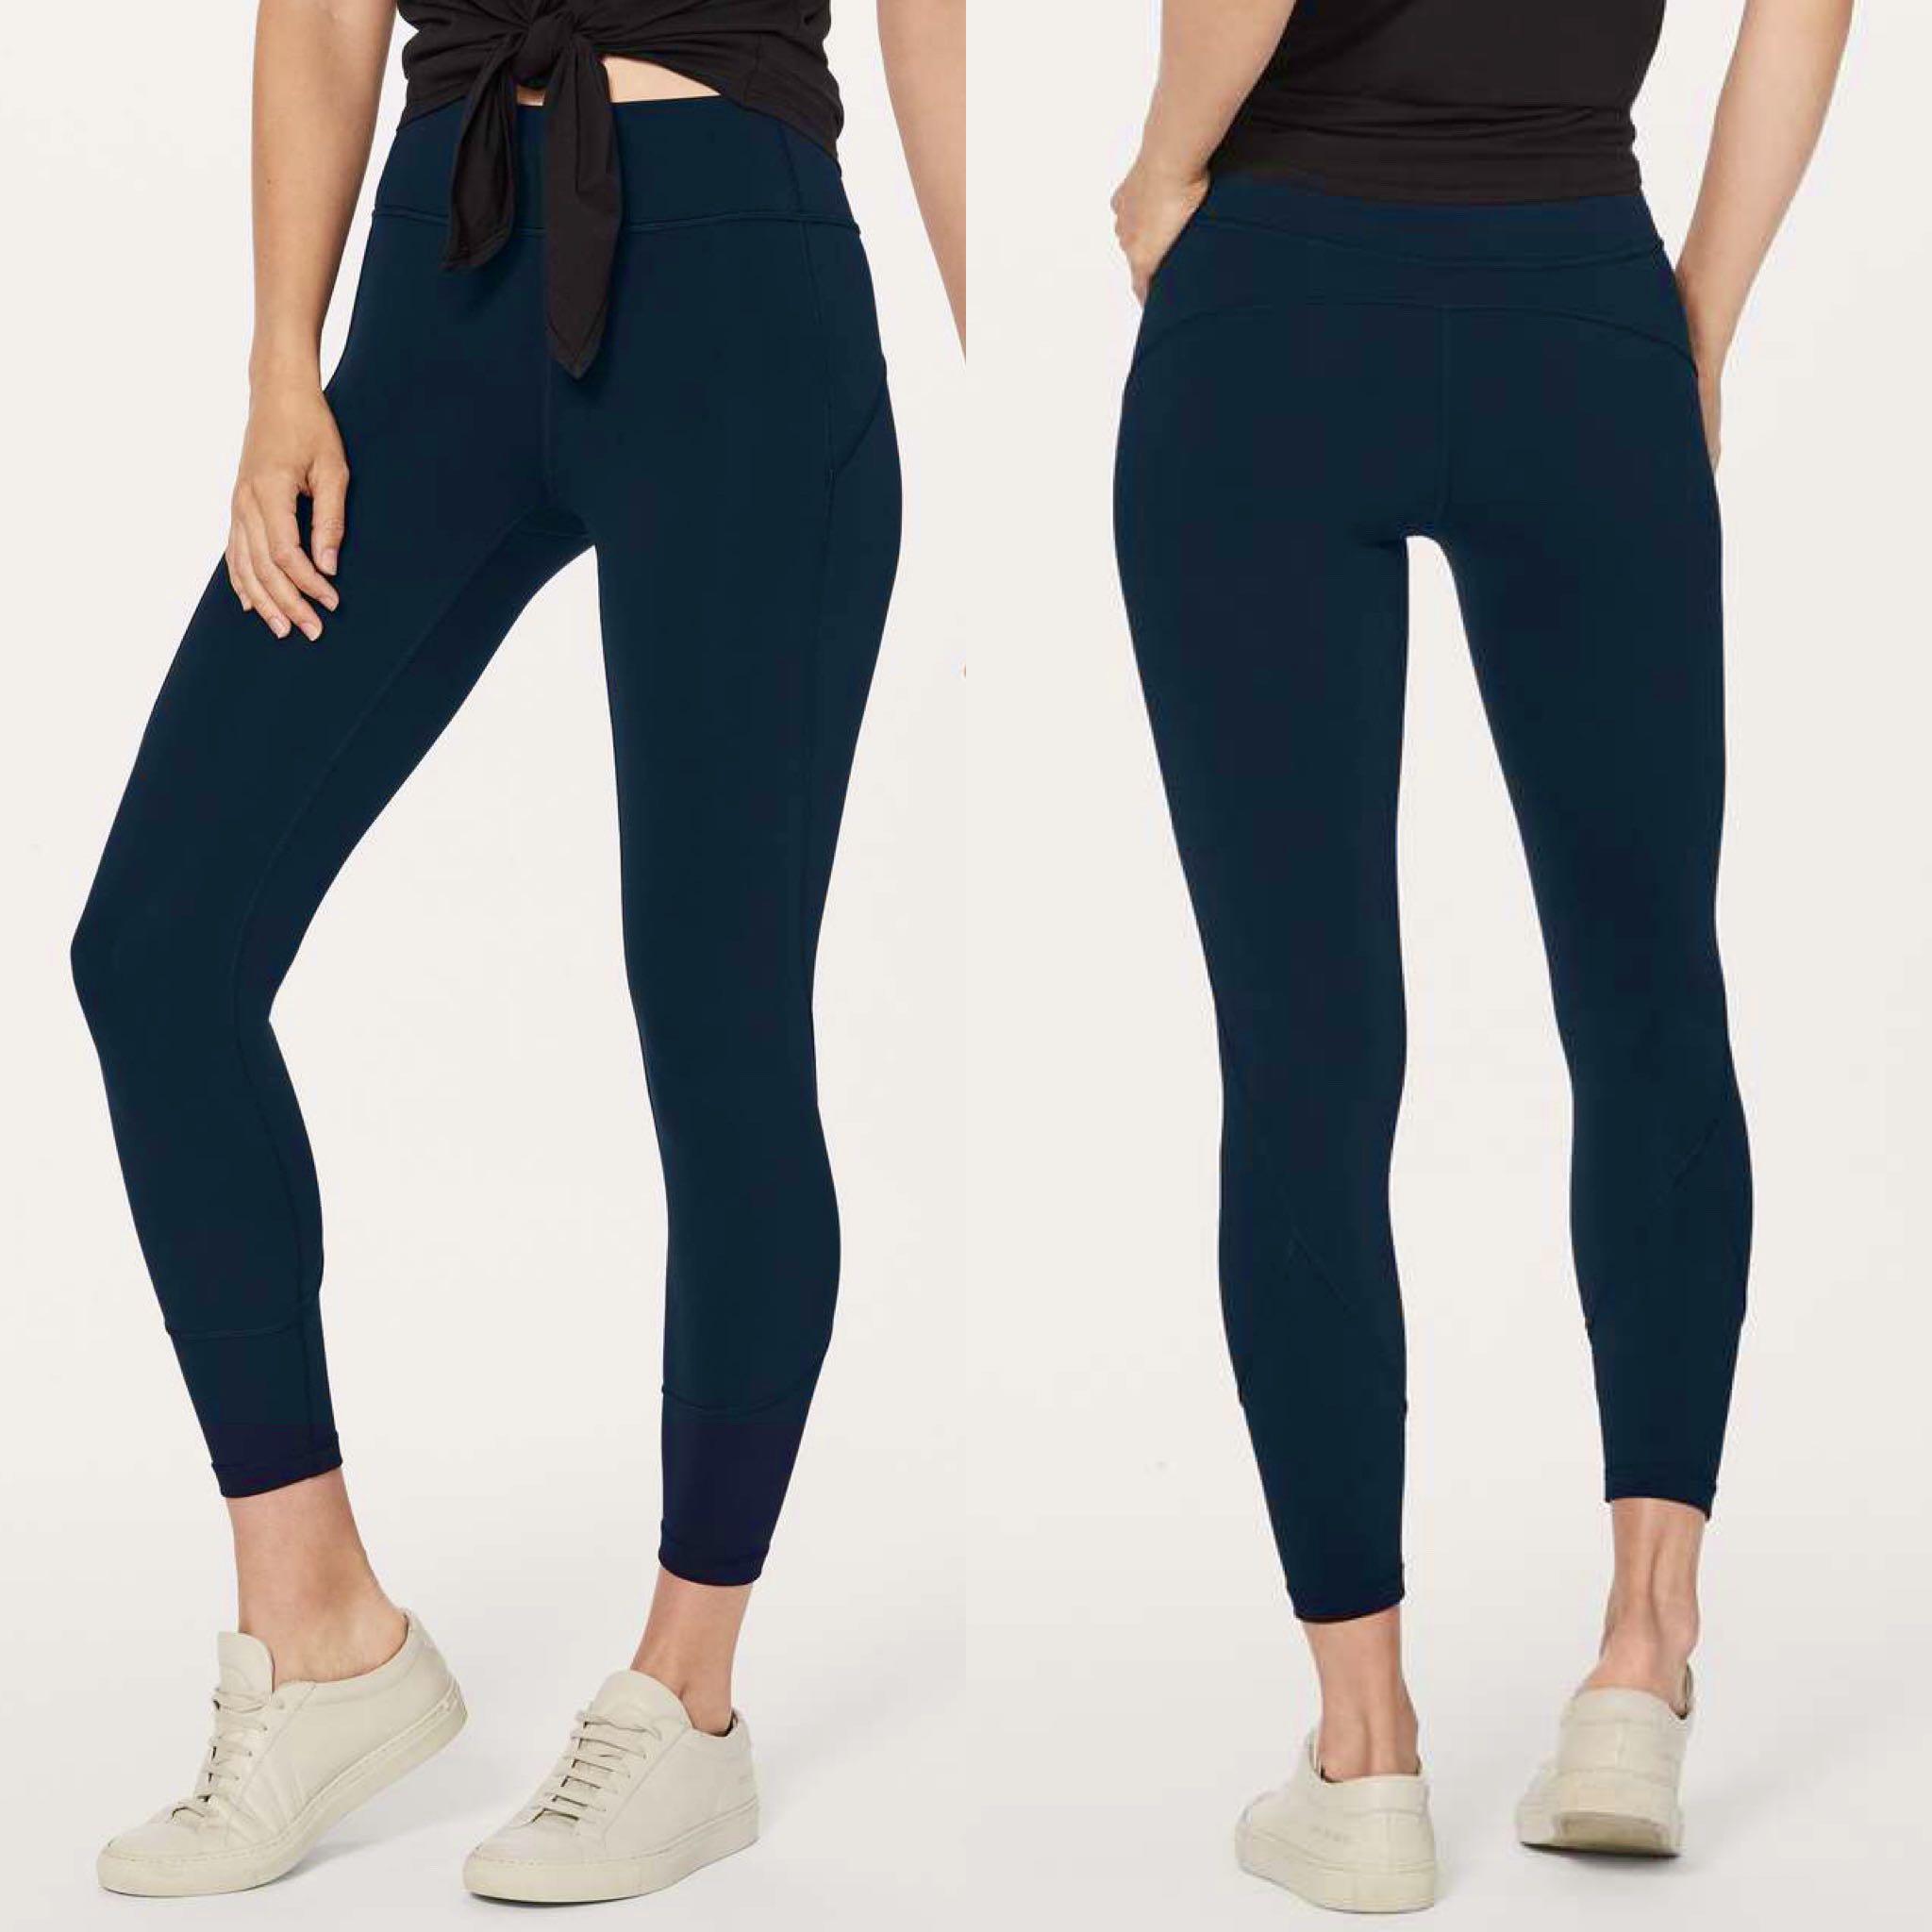 Lululemon In Movement HR Tight 25 - Nocturnal Teal size 4